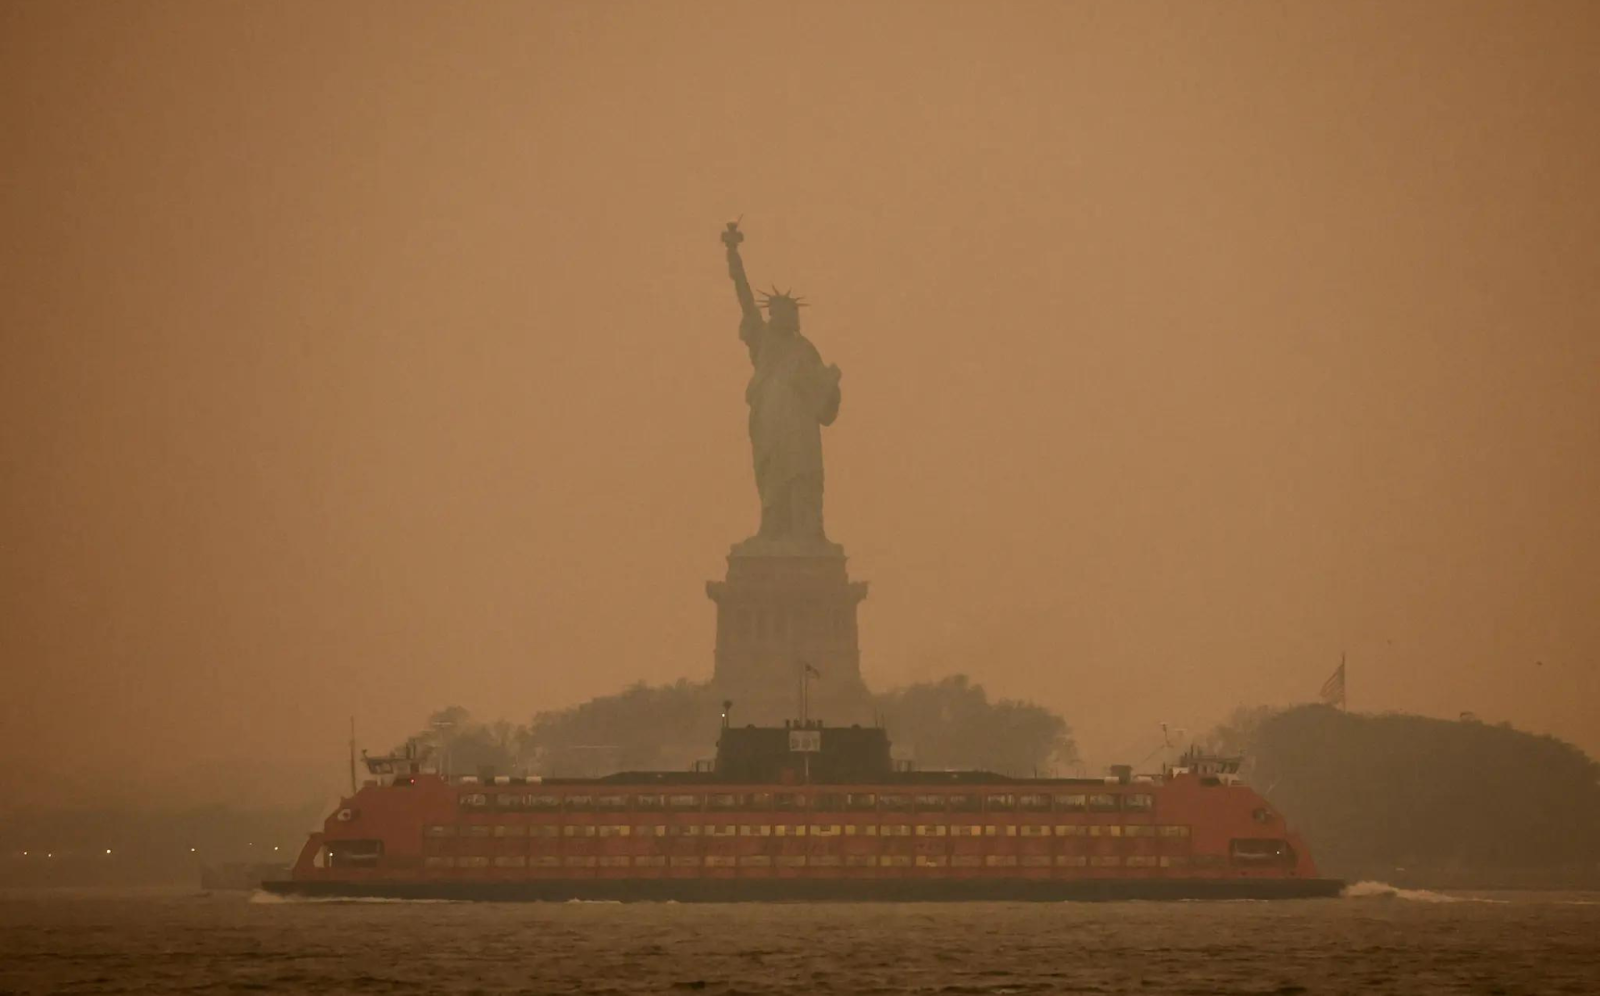 APOCALYPTIC SKIES; NEW YORKERS STRUGGLE TO SEE AND BREATHE